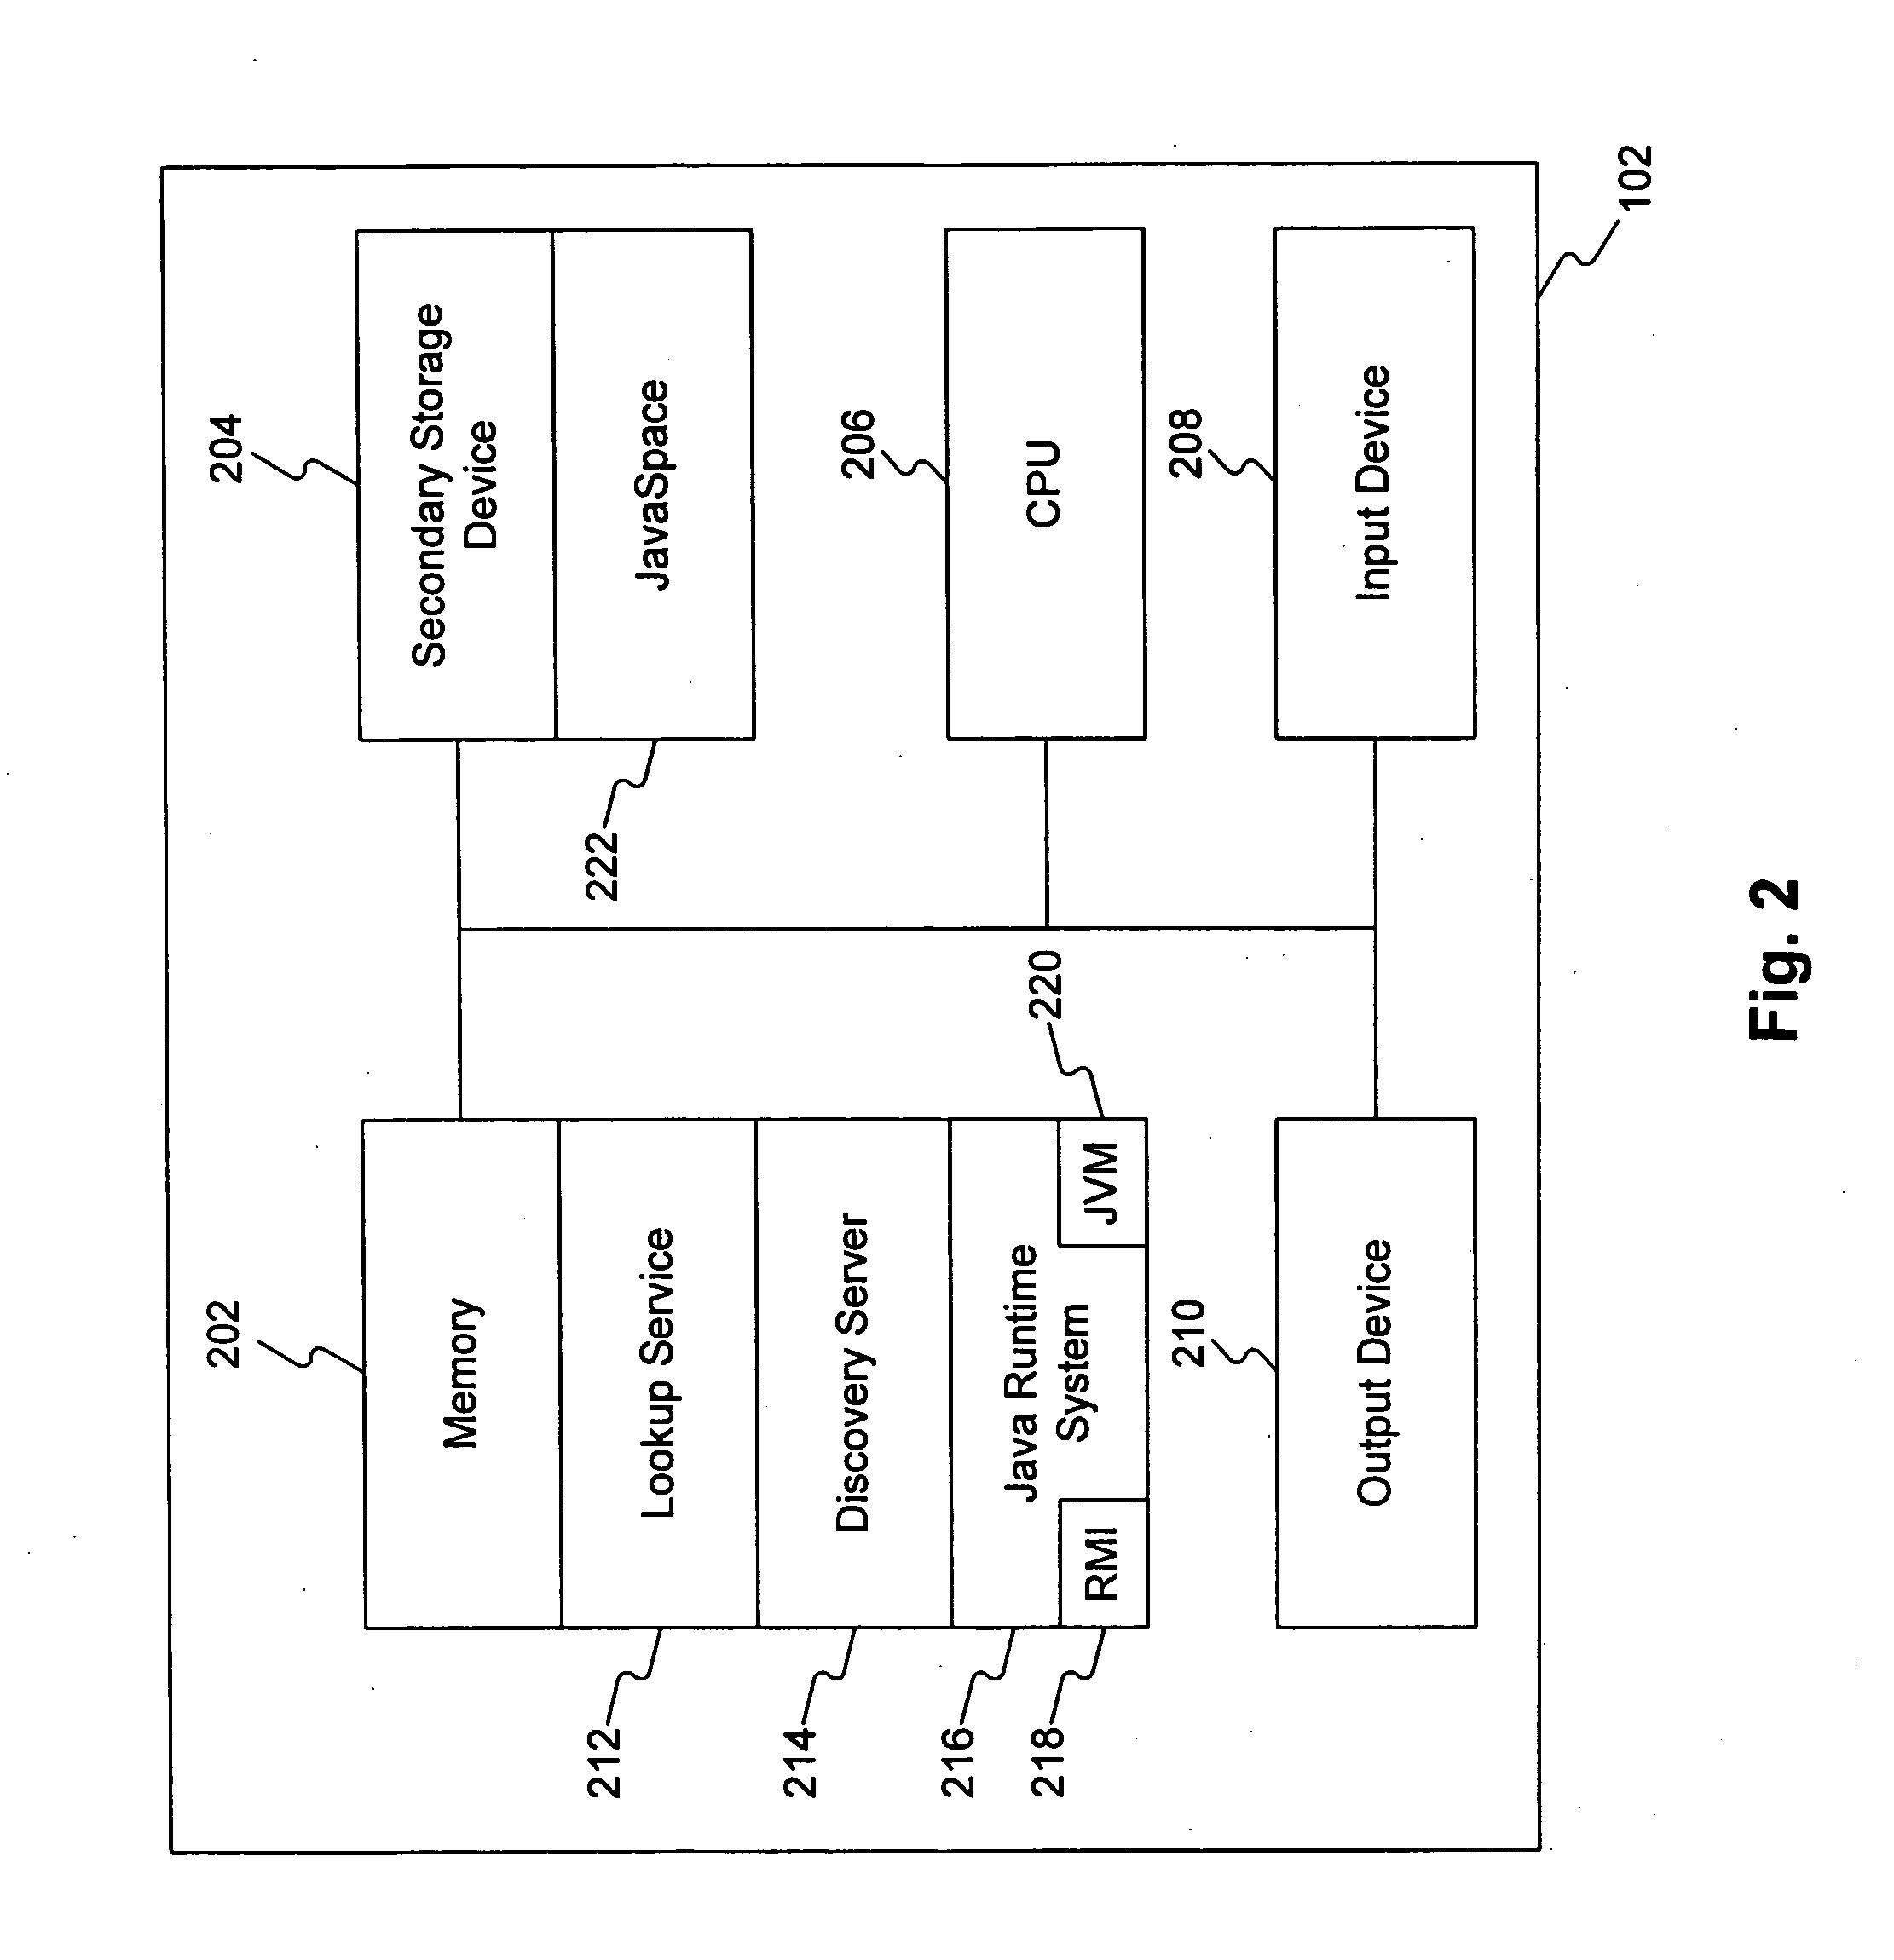 Dynamic provisioning of service components in a distributed system